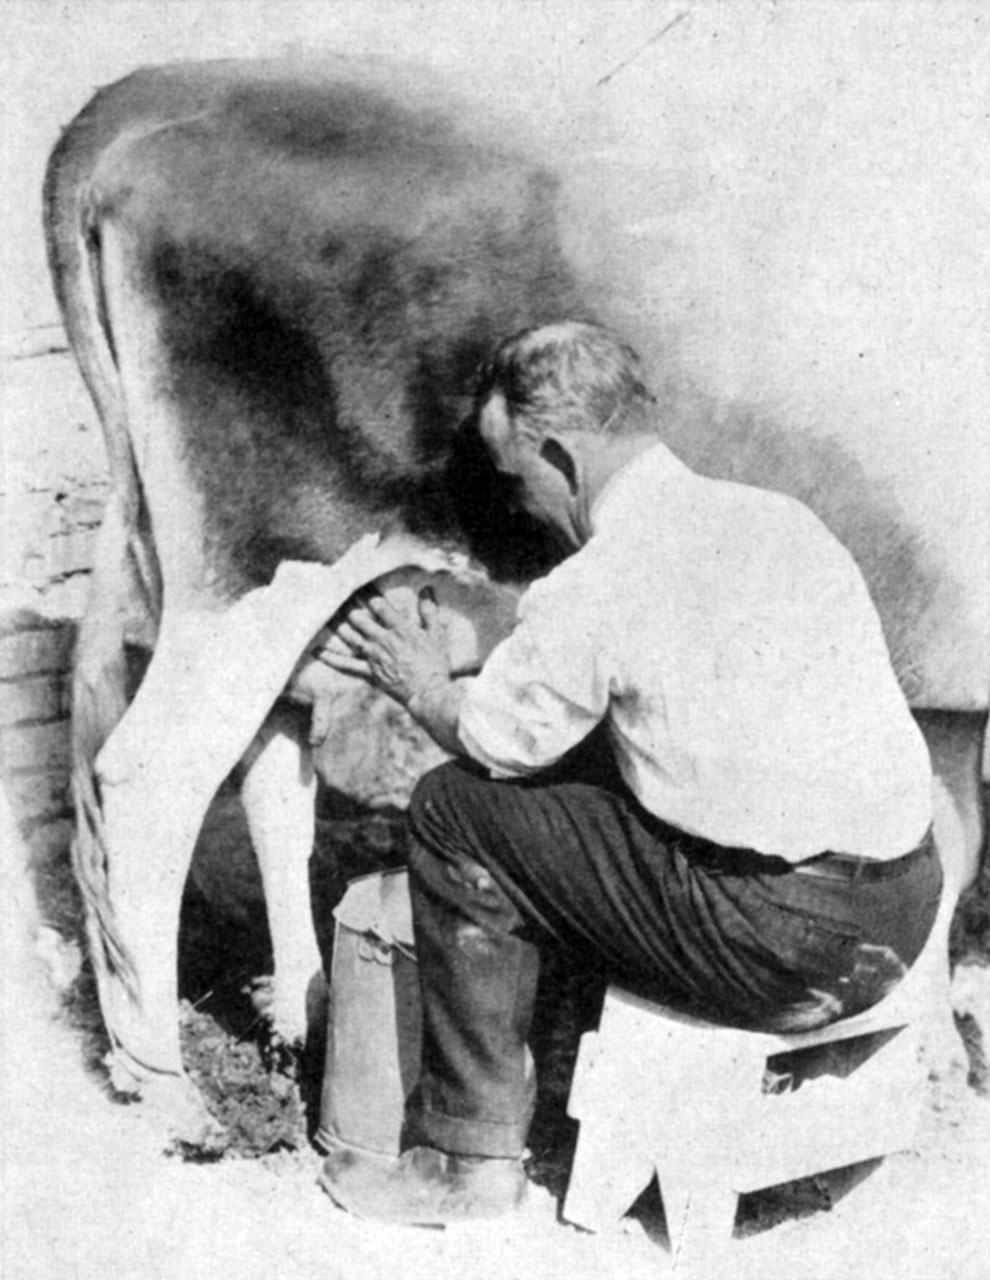 Milking the Cow Correctly